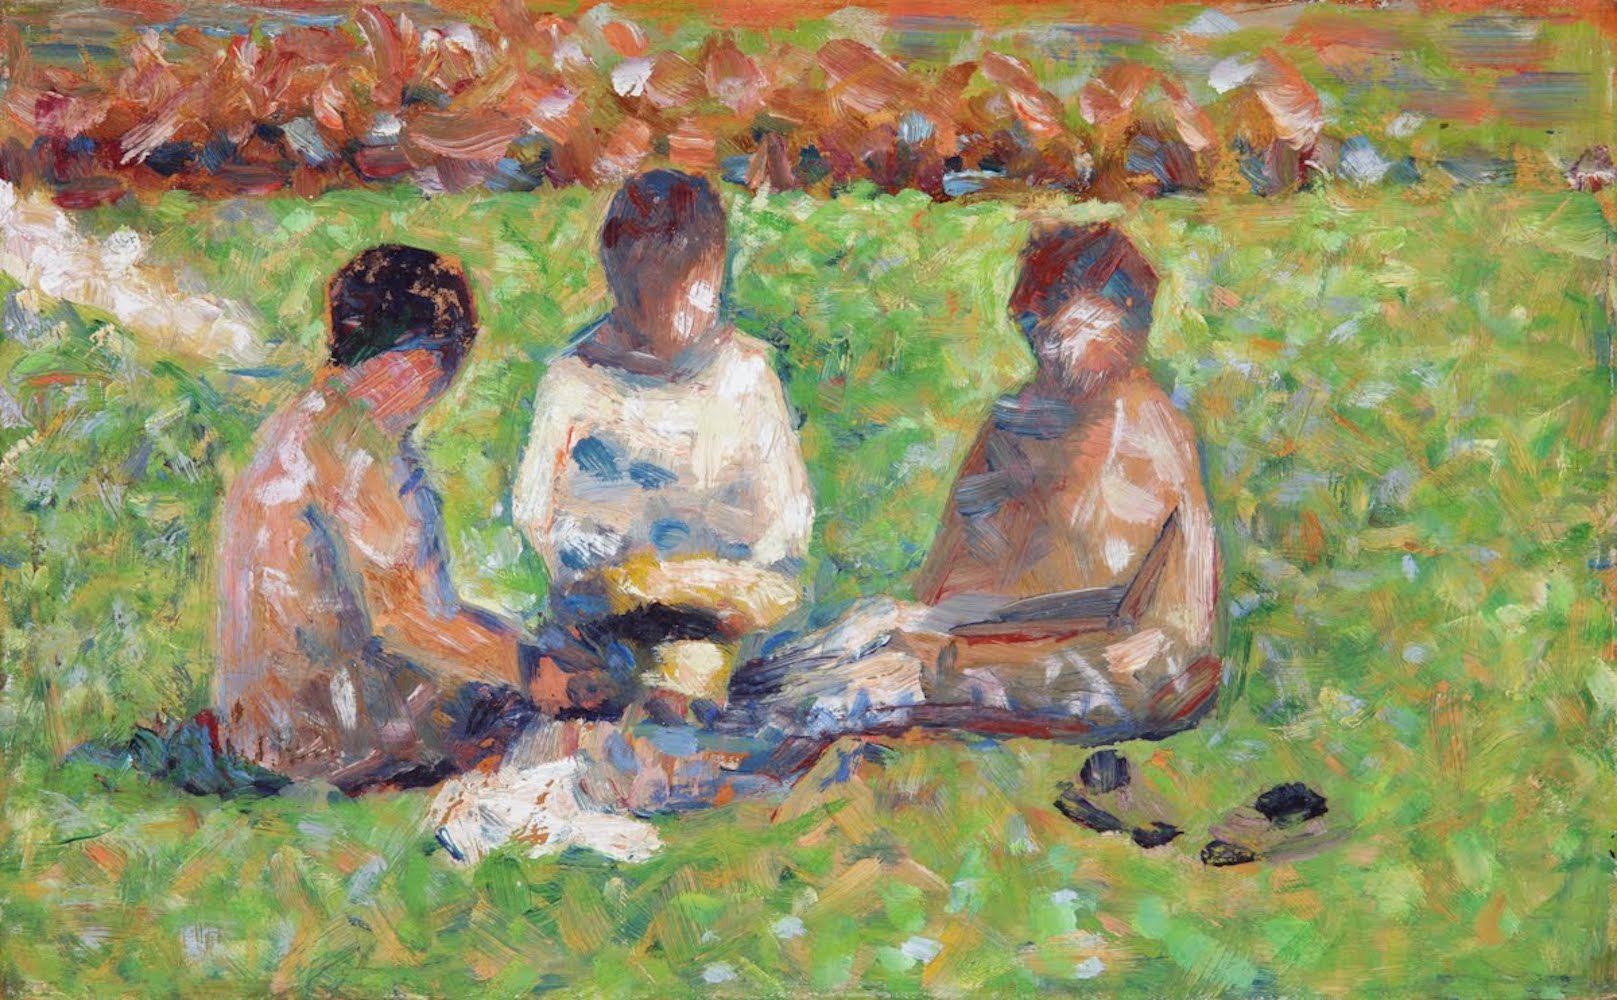 Das Picknick by Georges Seurat - ca. 1885 - 15,9 × 25,4 cm Dixon Gallery and Gardens